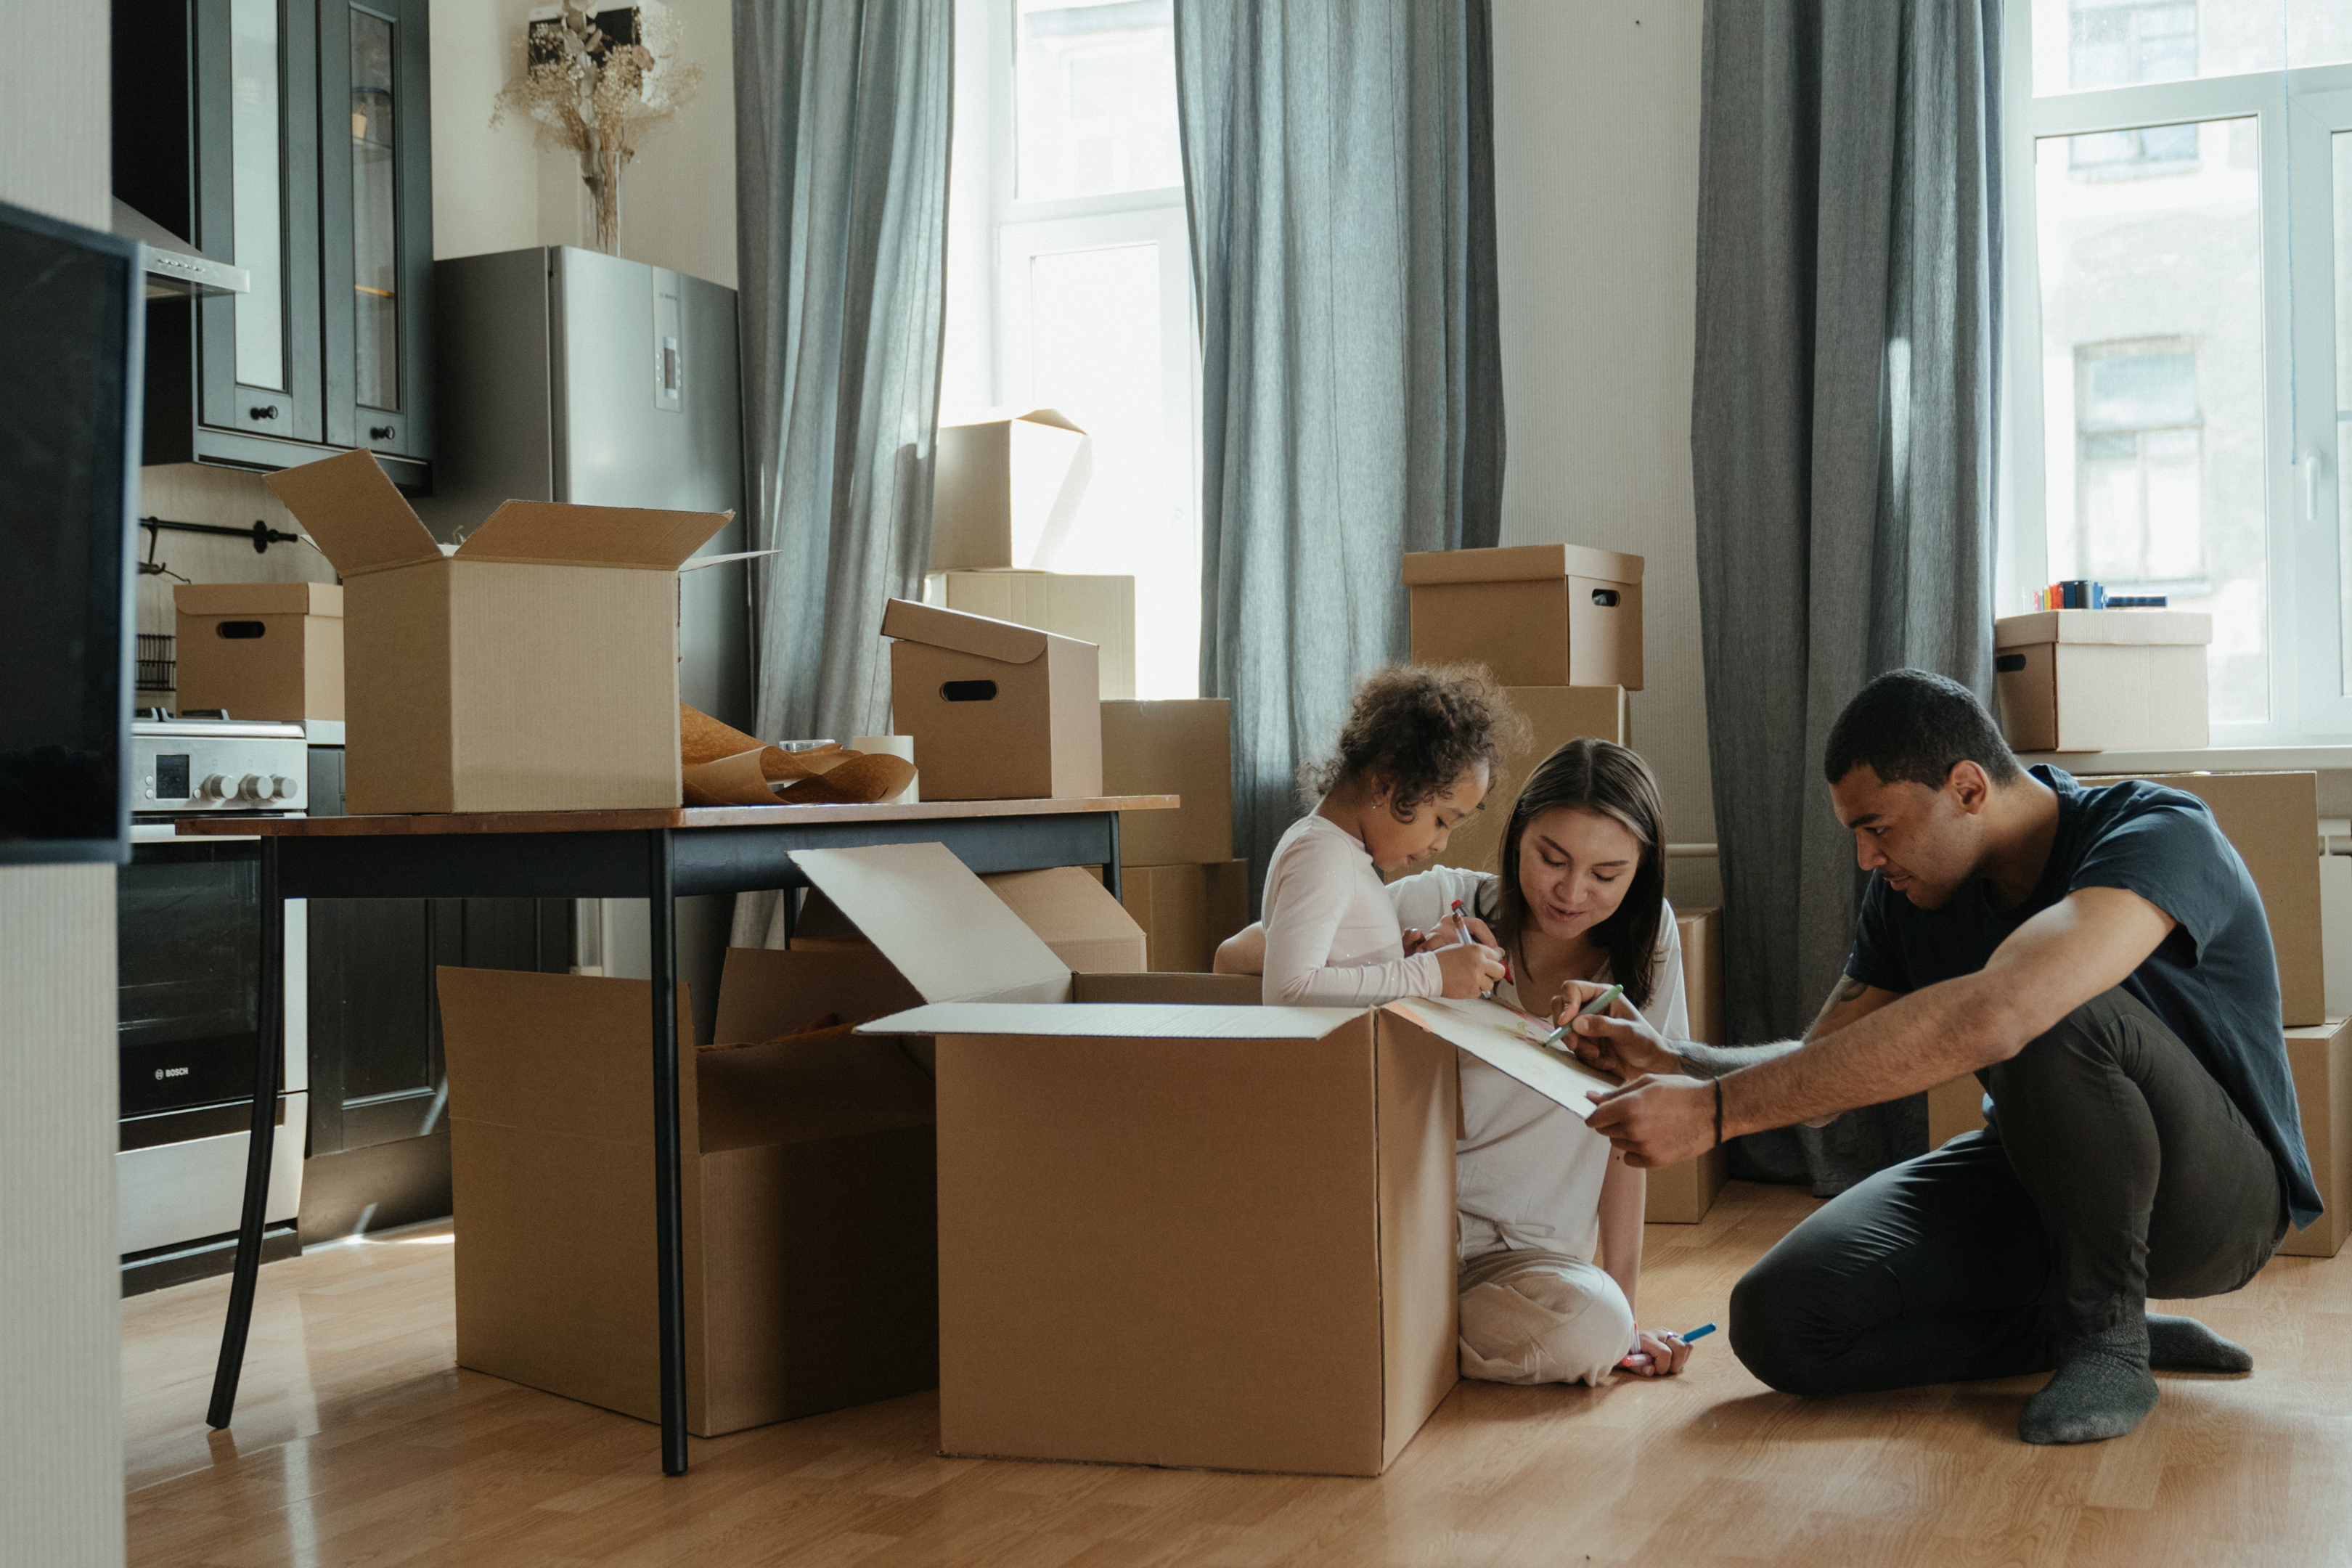 Moving to a home that is bigger and better is one of the top reasons people sell their property | Photo by cottonbro from Pexels